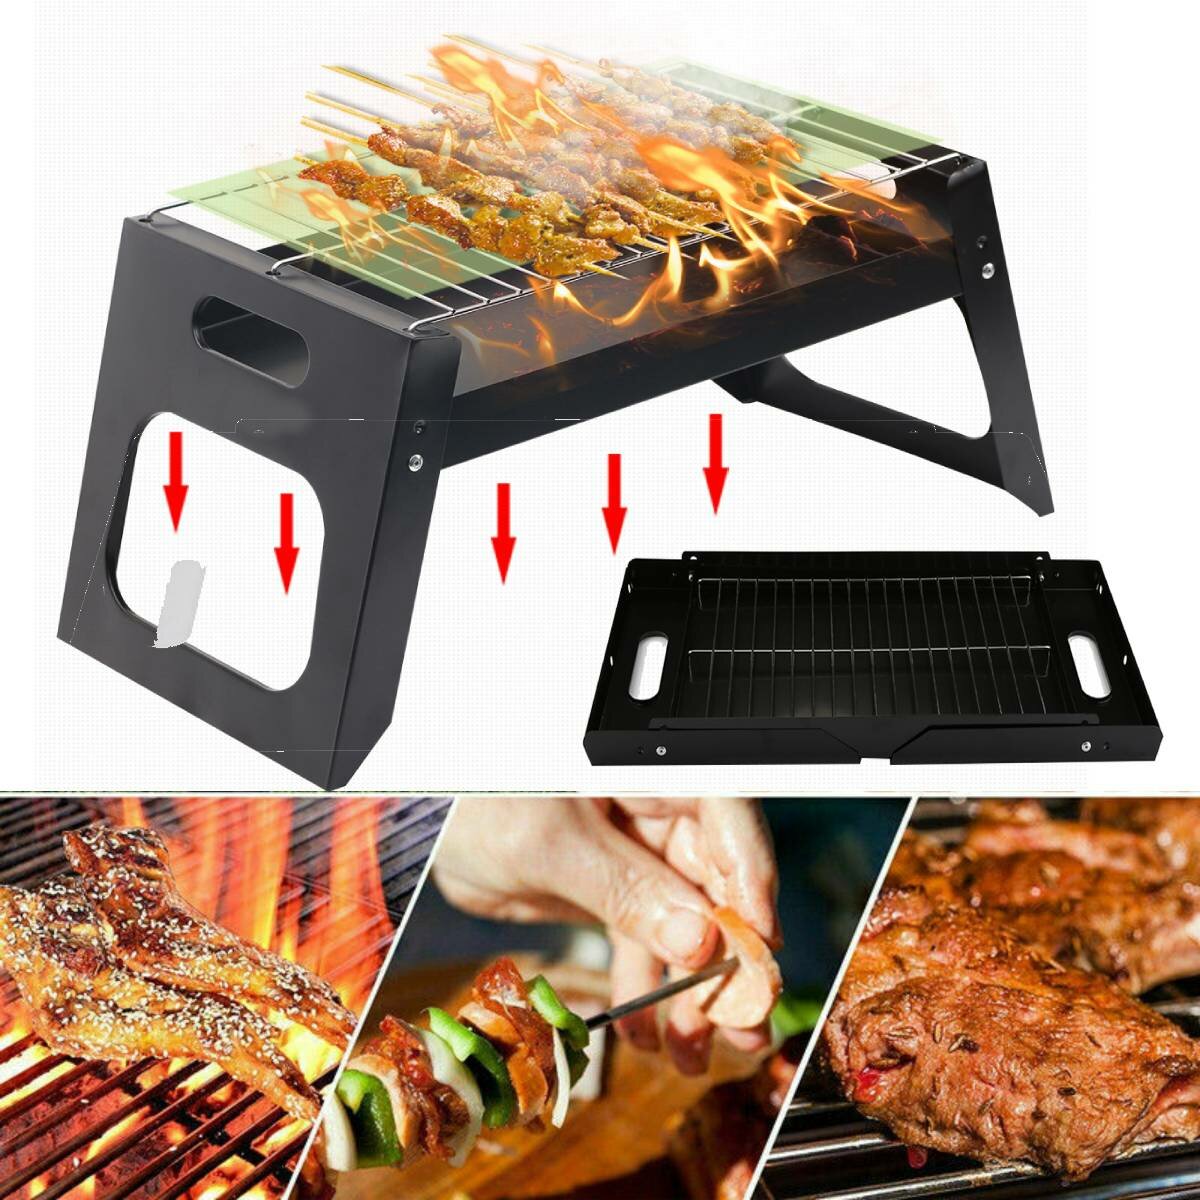 17.55x8.58x8.39in Opvouwbare BBQ Grill Kachel Roestvrij Barbecue Houtskool Grill Outdoor Camping BBQ